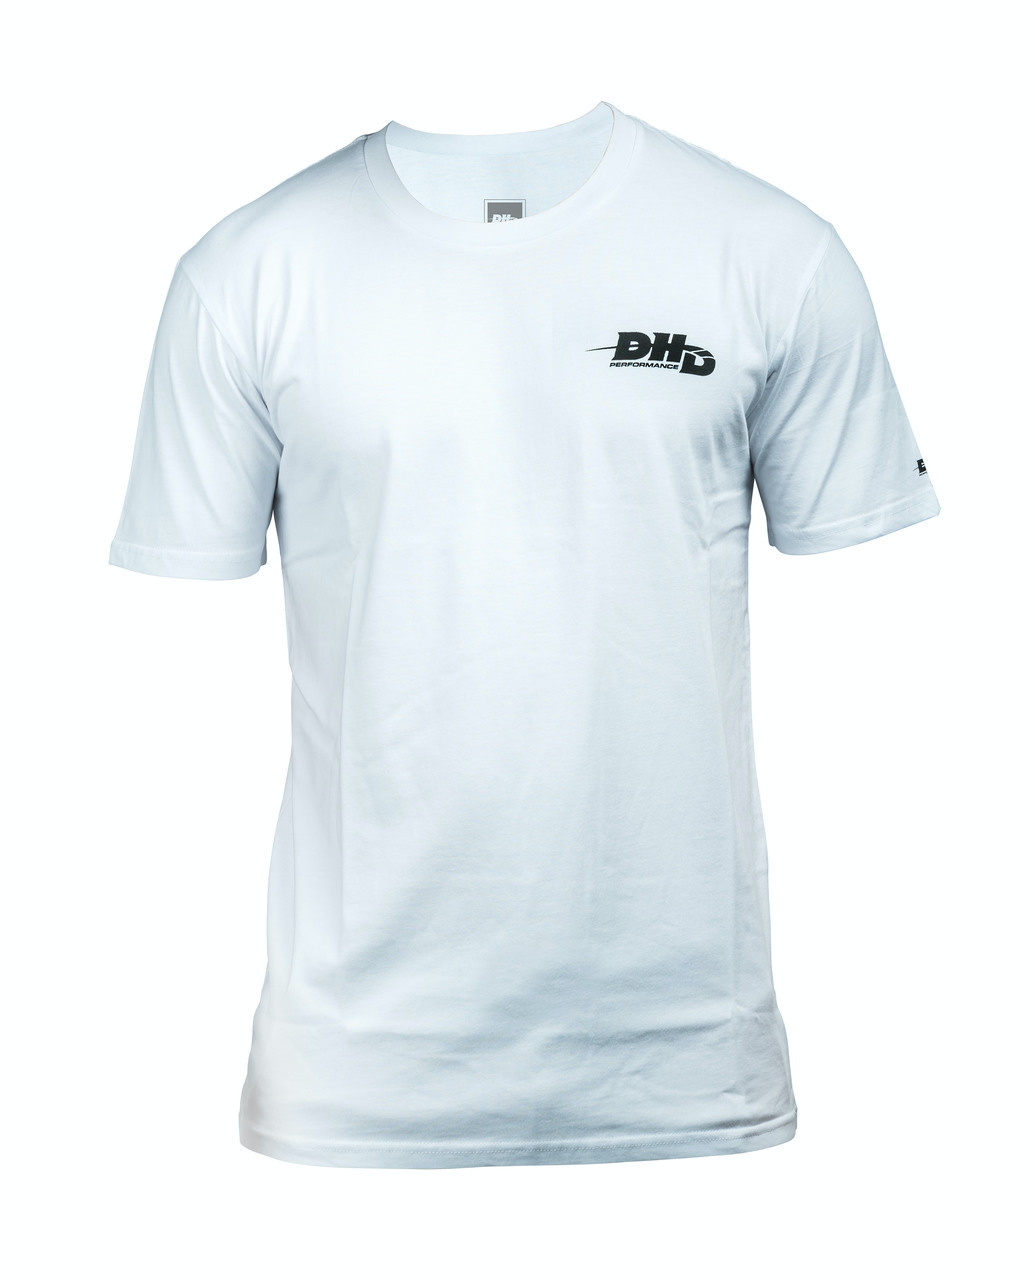 DHD Performance Surfboards T-shirt WHITE/Black